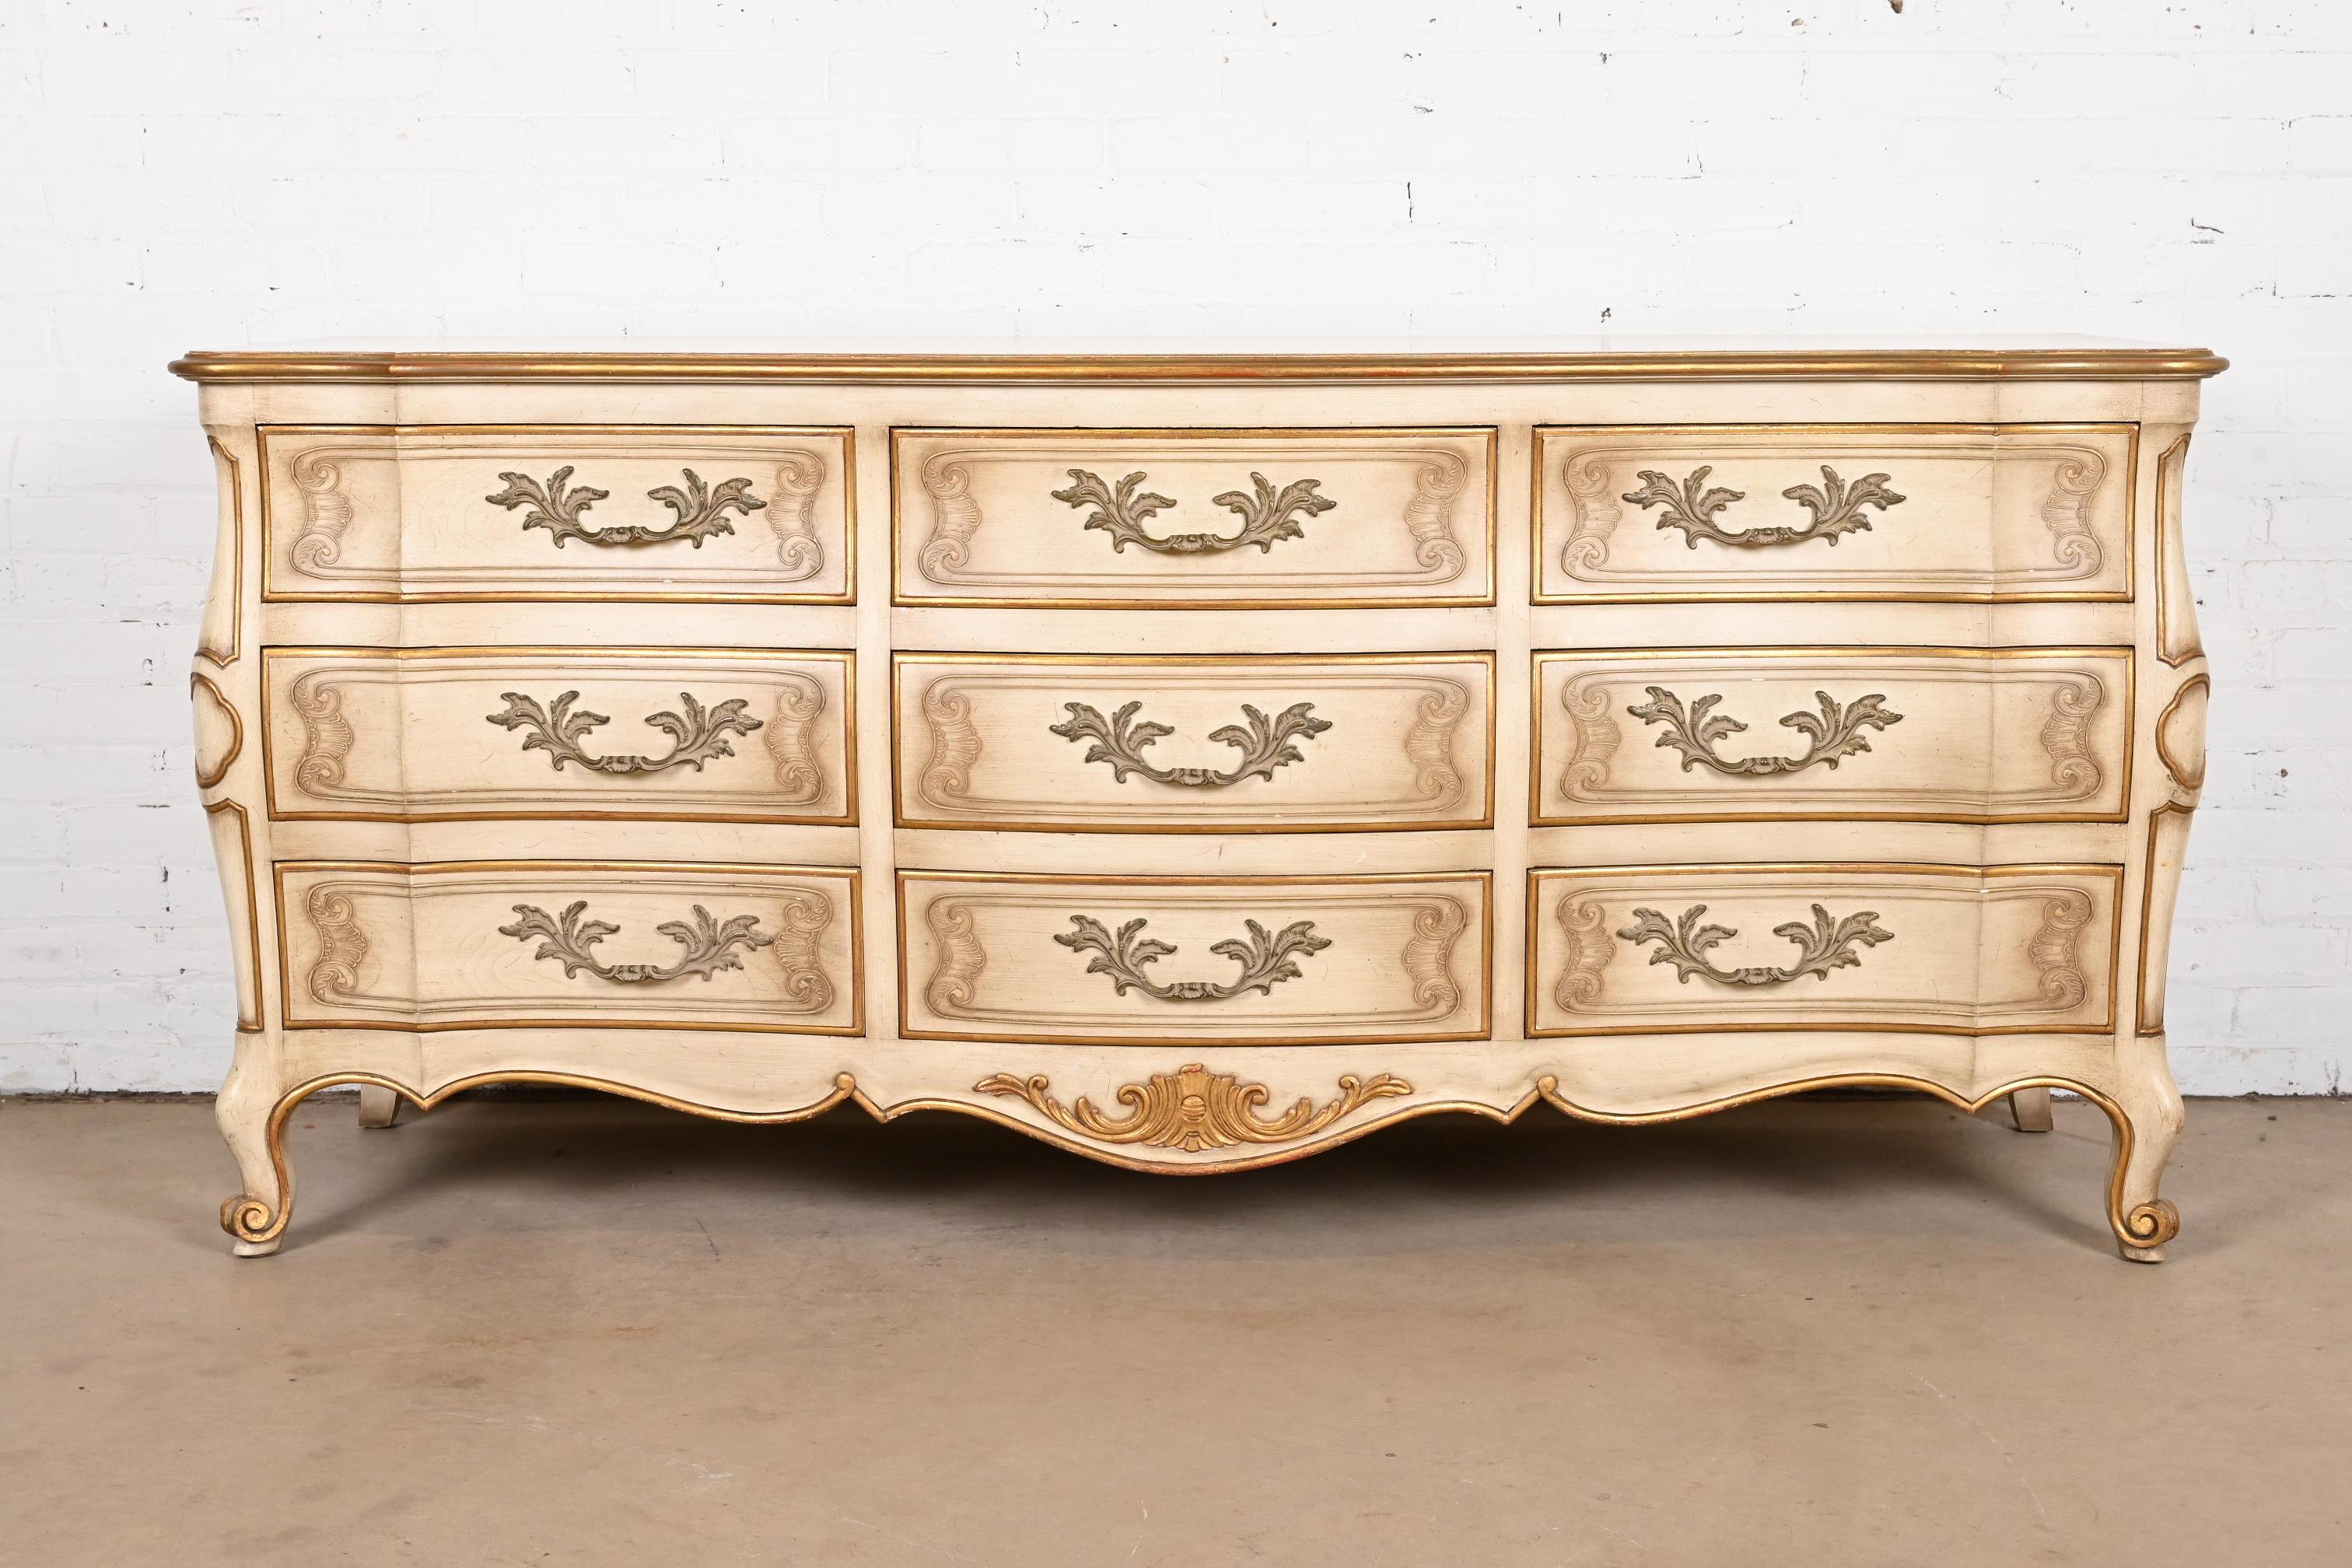 A gorgeous French Rococo or French Provincial Louis XV style nine-drawer dresser or credenza

By John Widdicomb

USA, Circa 1950s

Solid carved cherry wood, with original cream lacquered and gold gilt over red lacquer finish, and brass